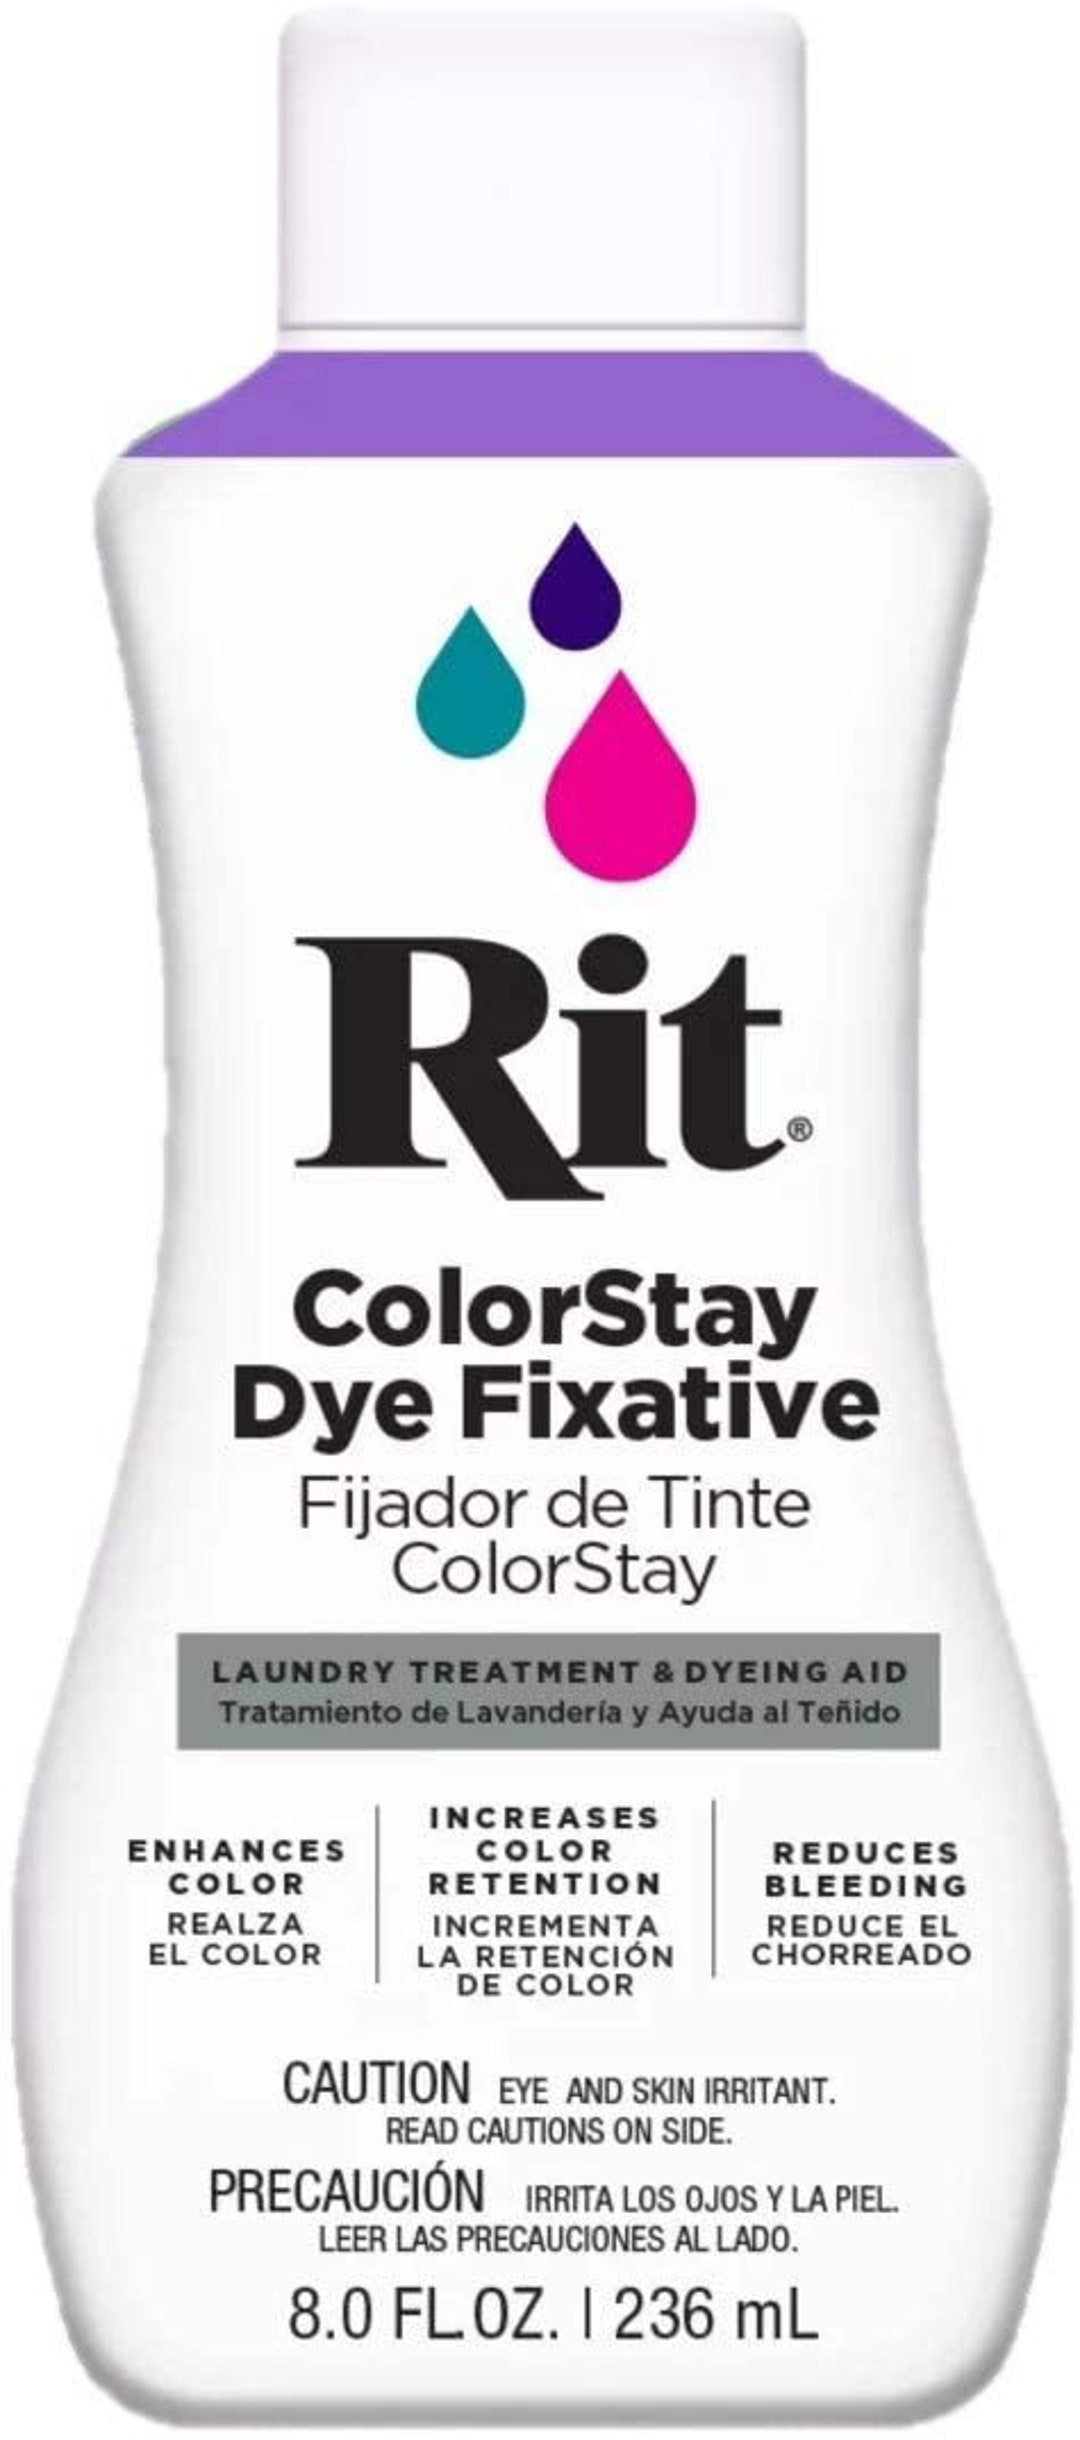 Rit Dye Liquid Sampler Kit- Wide Selection of Colors and Rope